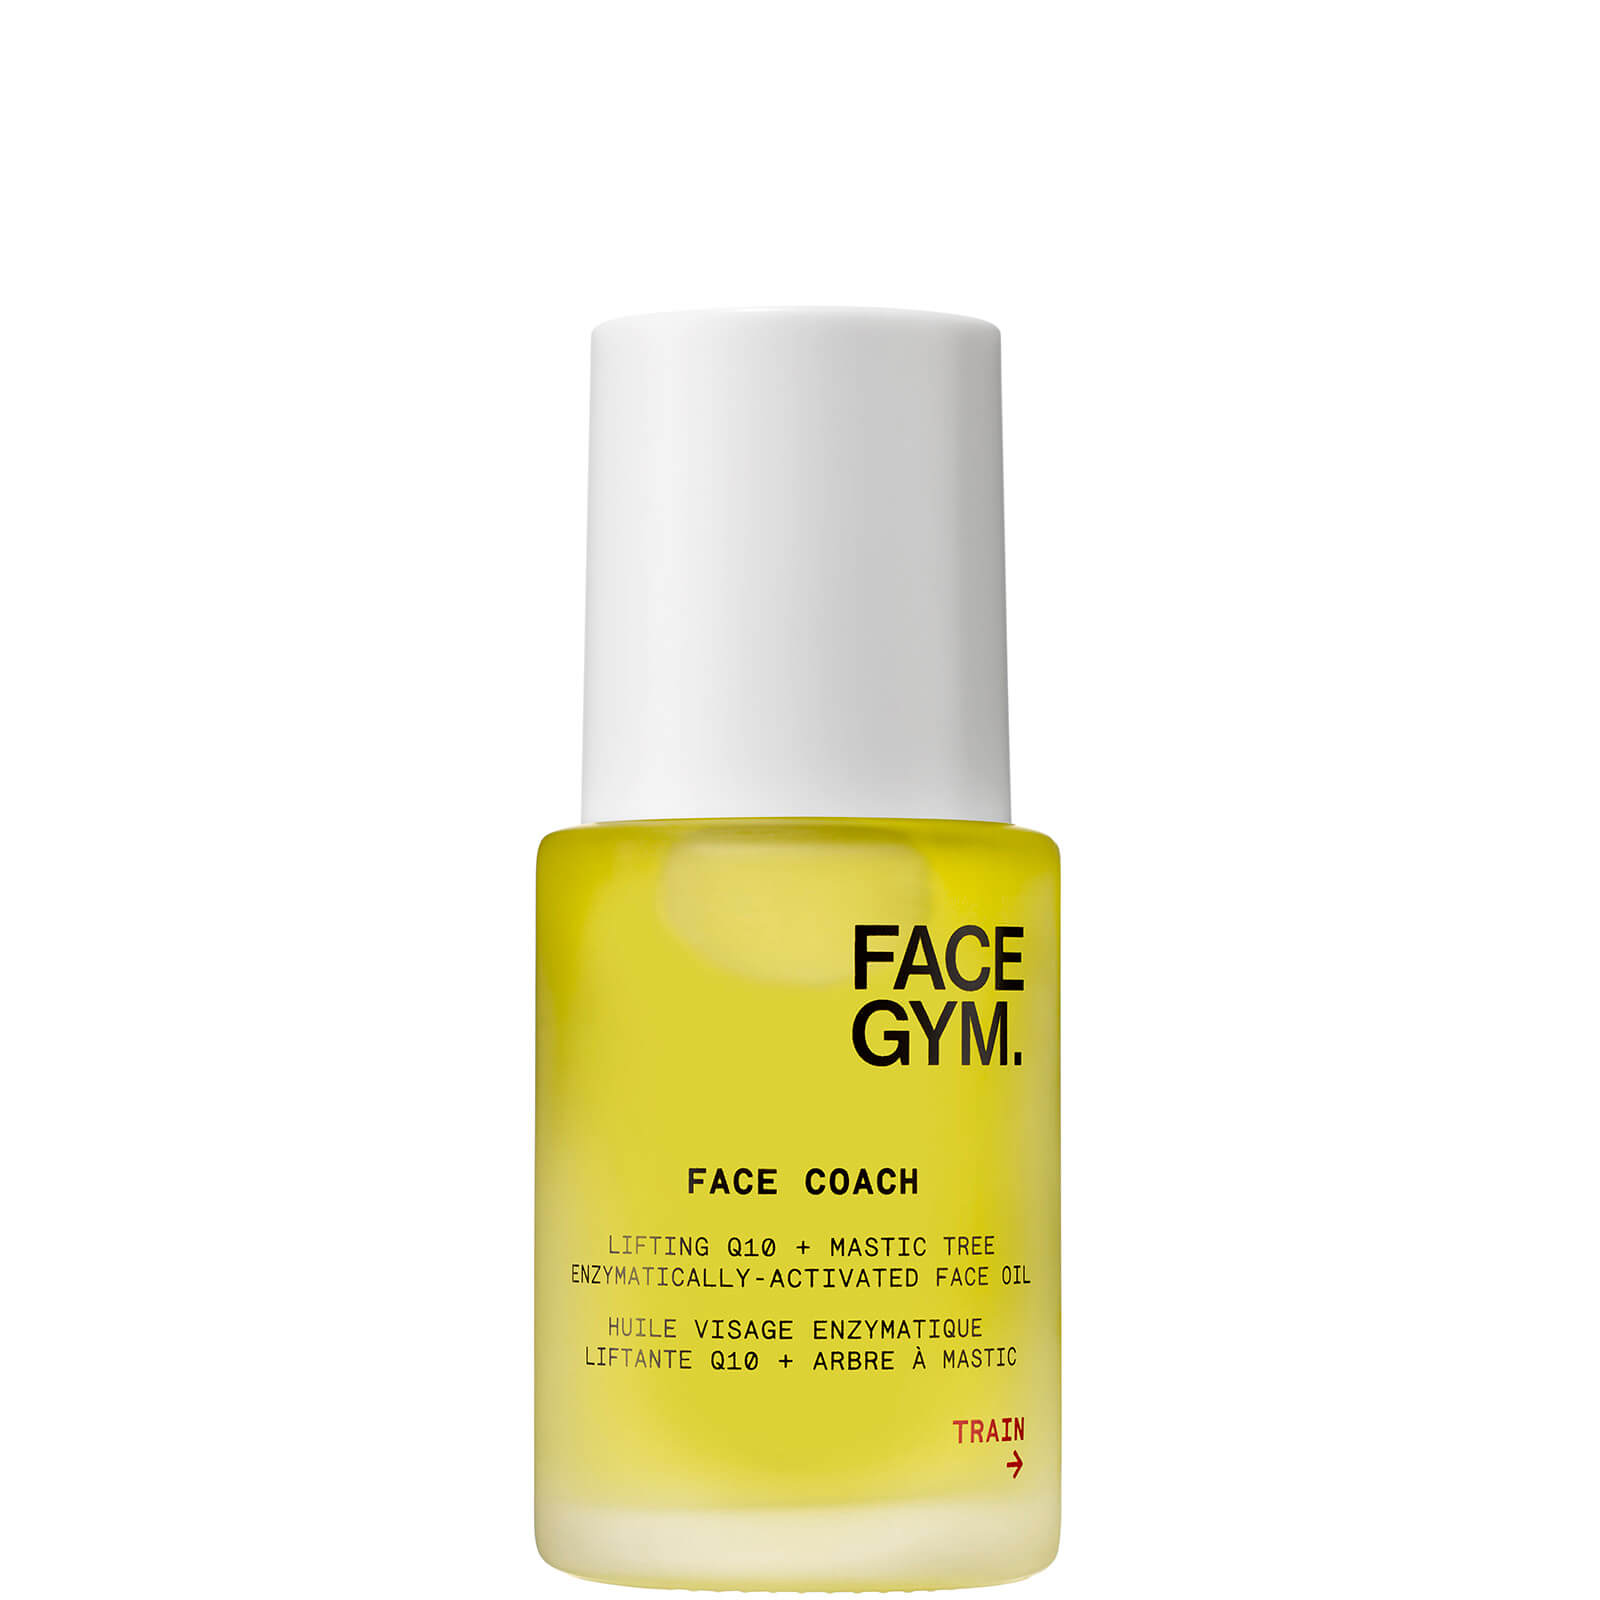 FaceGym Face Coach Lifting Q10 and Mastic Tree Enzymatically-activated Face Oil (Various Sizes) - 30